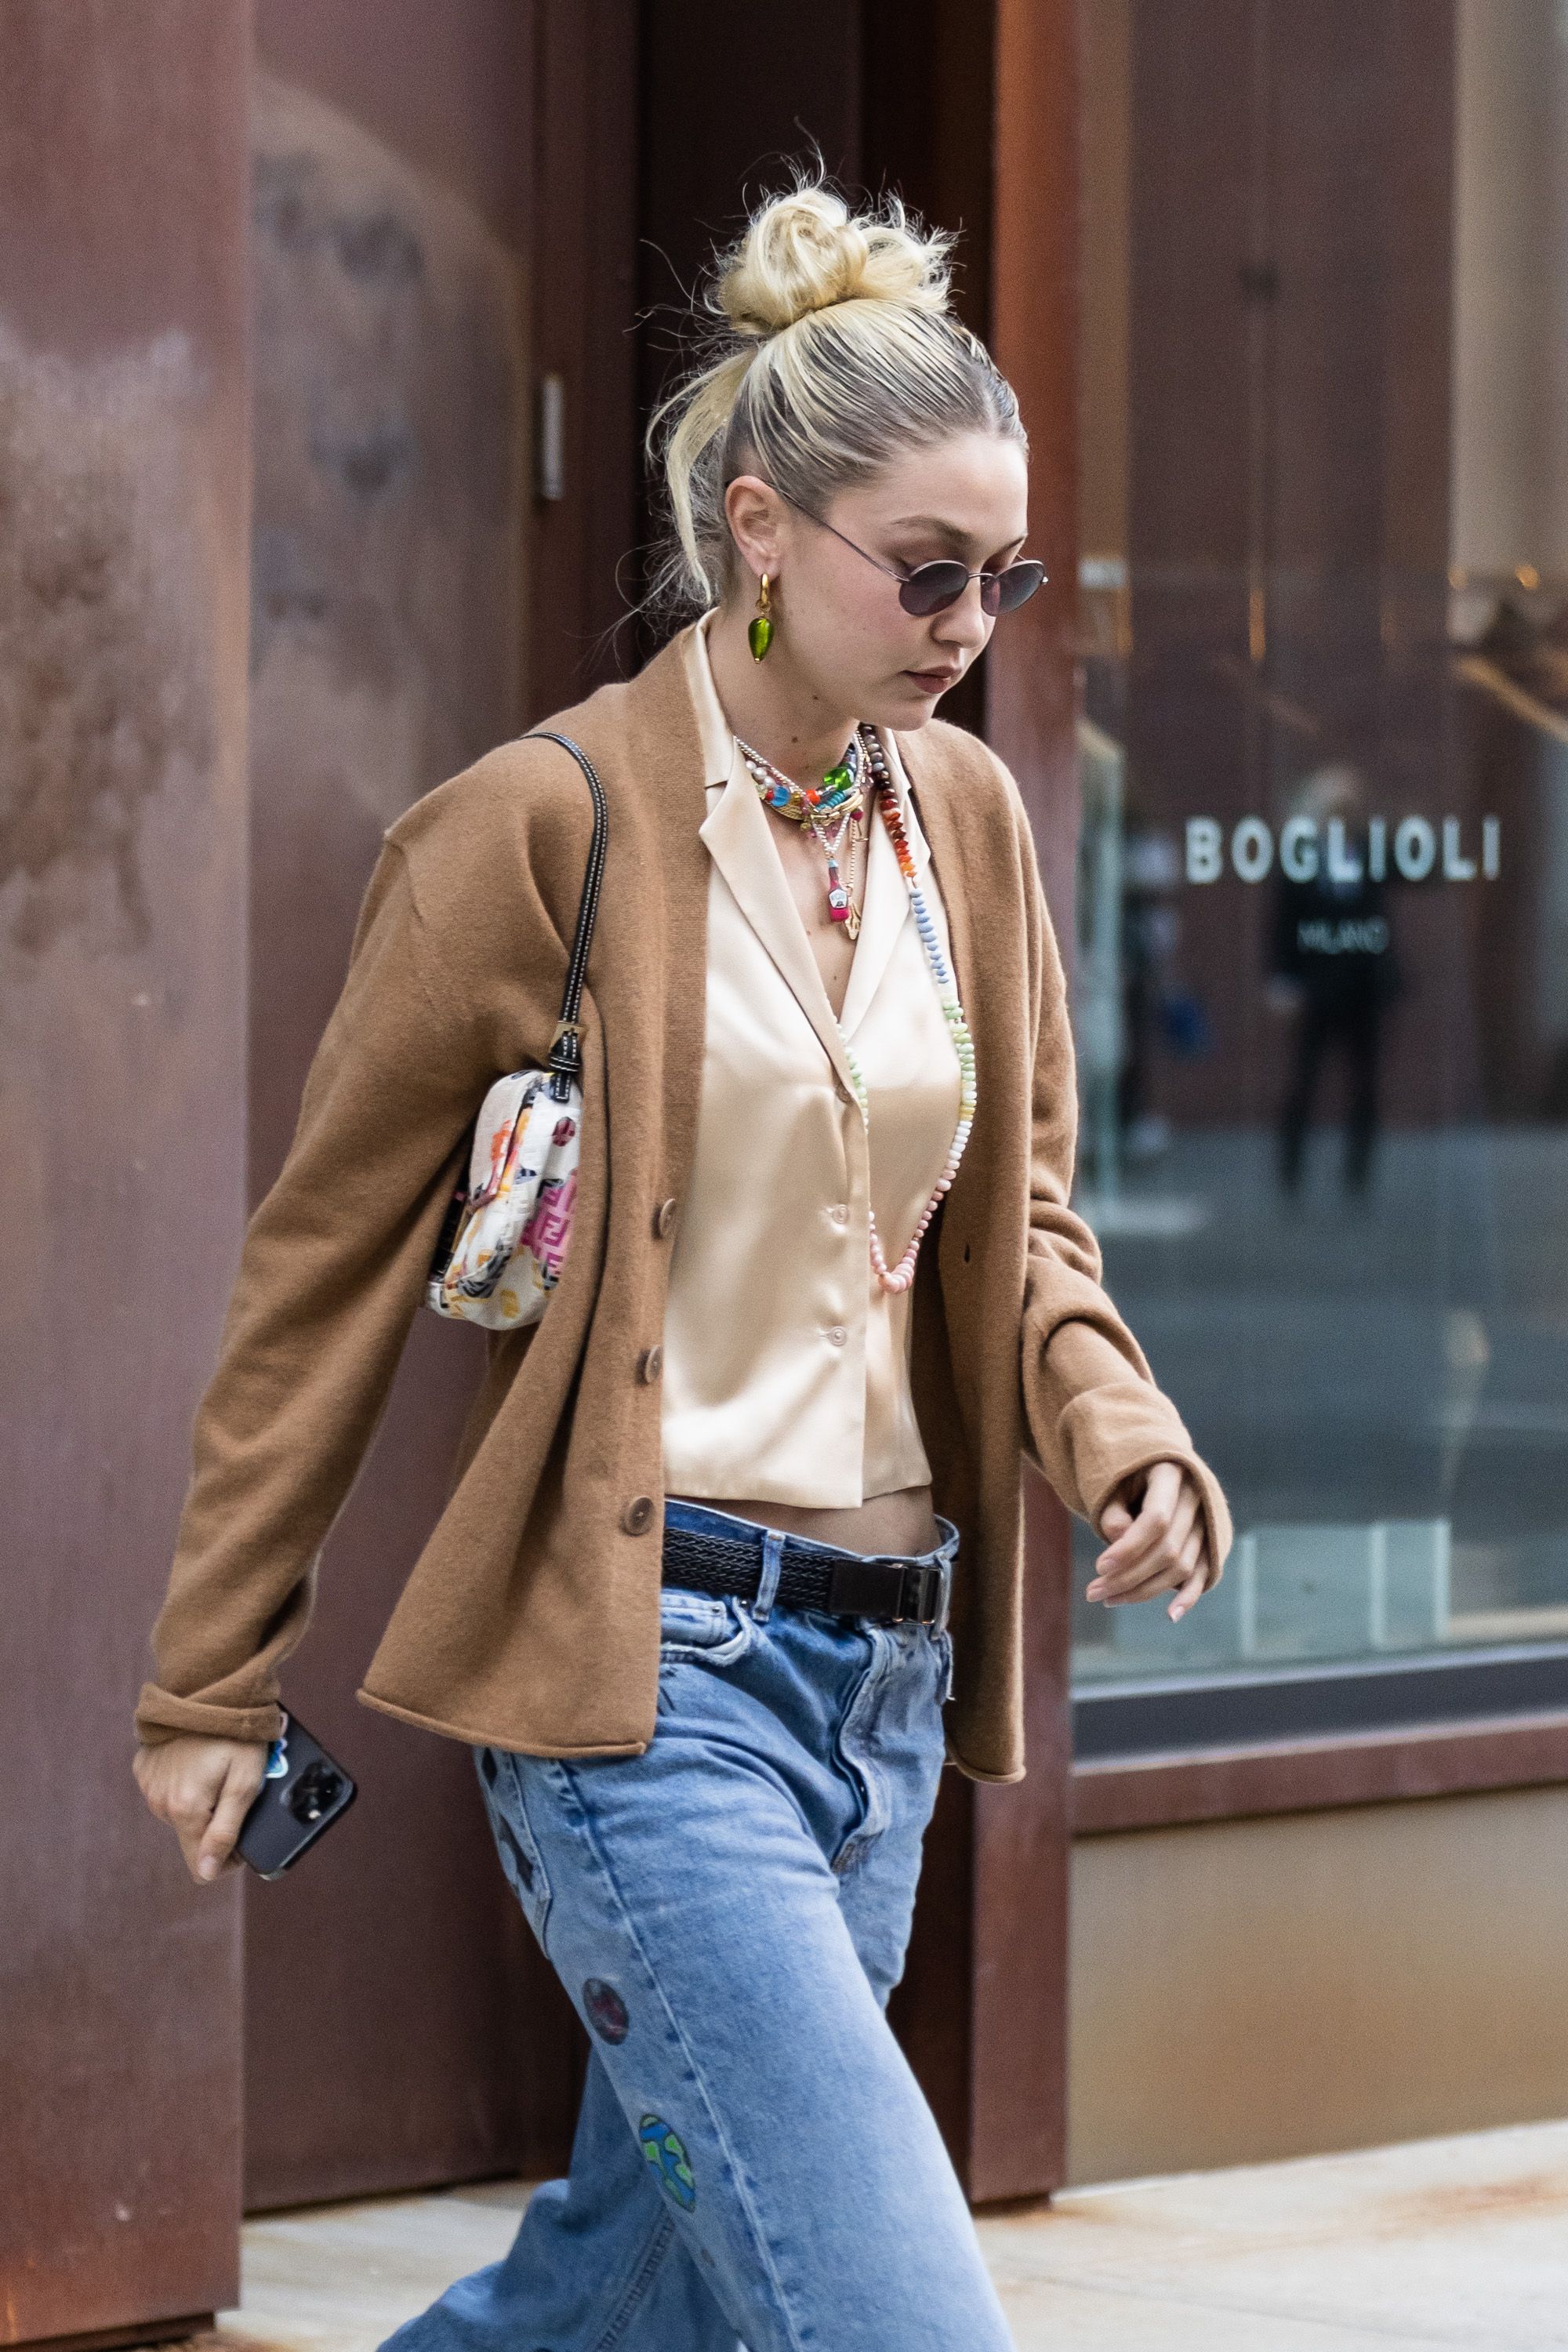 Gigi Hadid Wears a Cream-Colored Knit Top and Matching Trousers